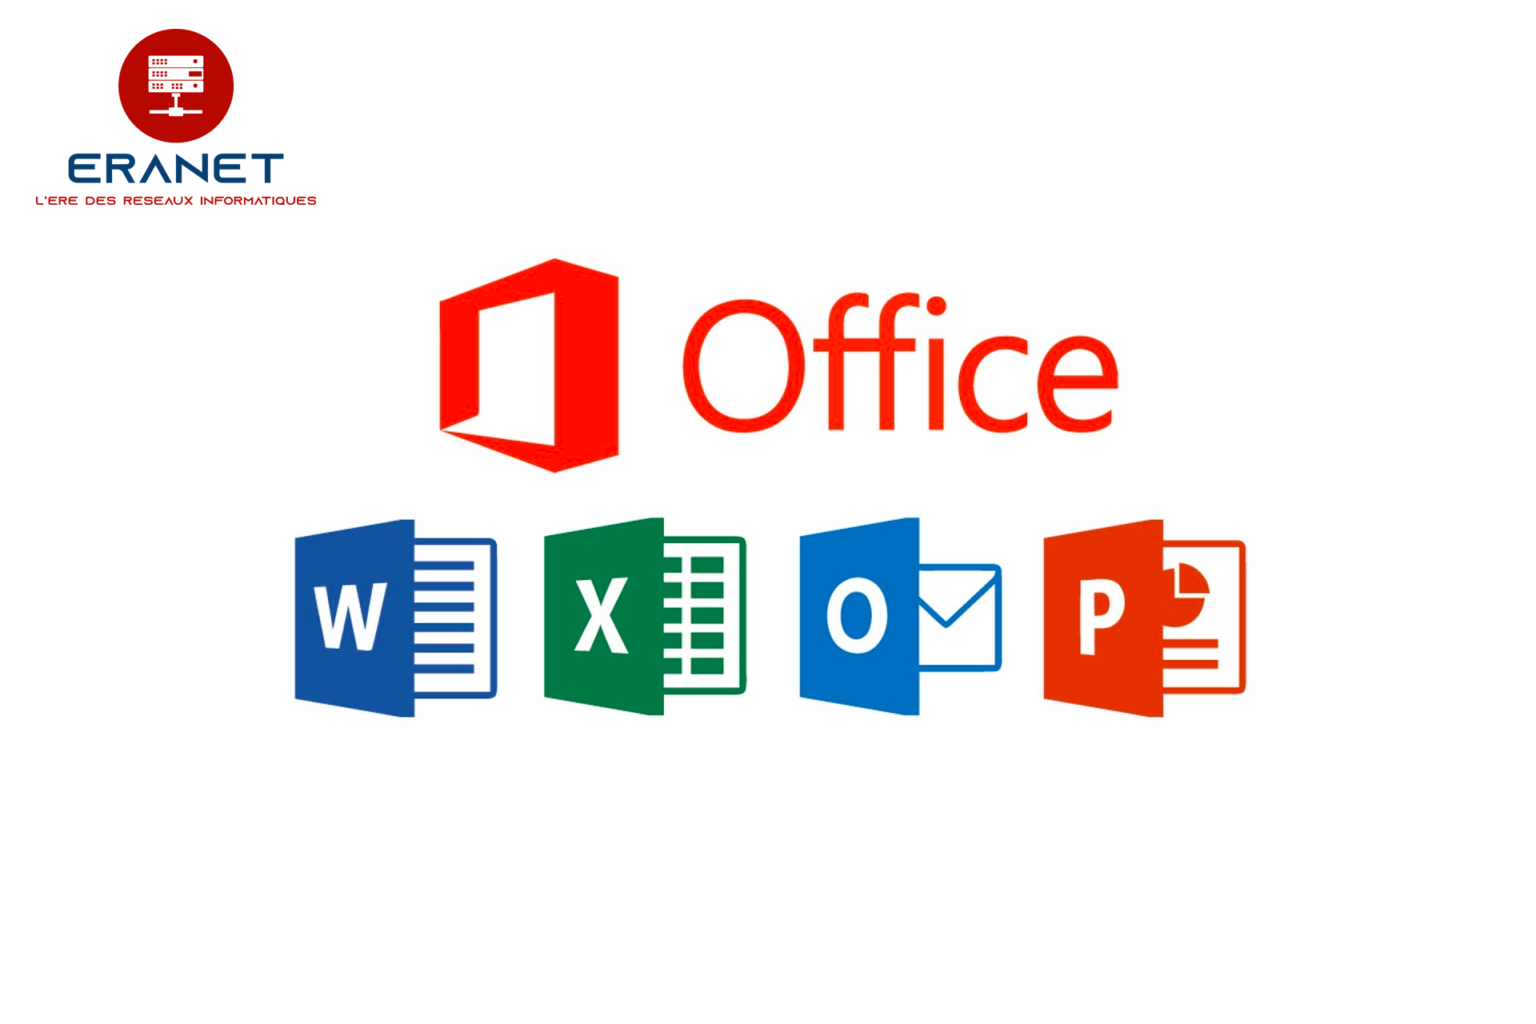 microsoft office suite for windows